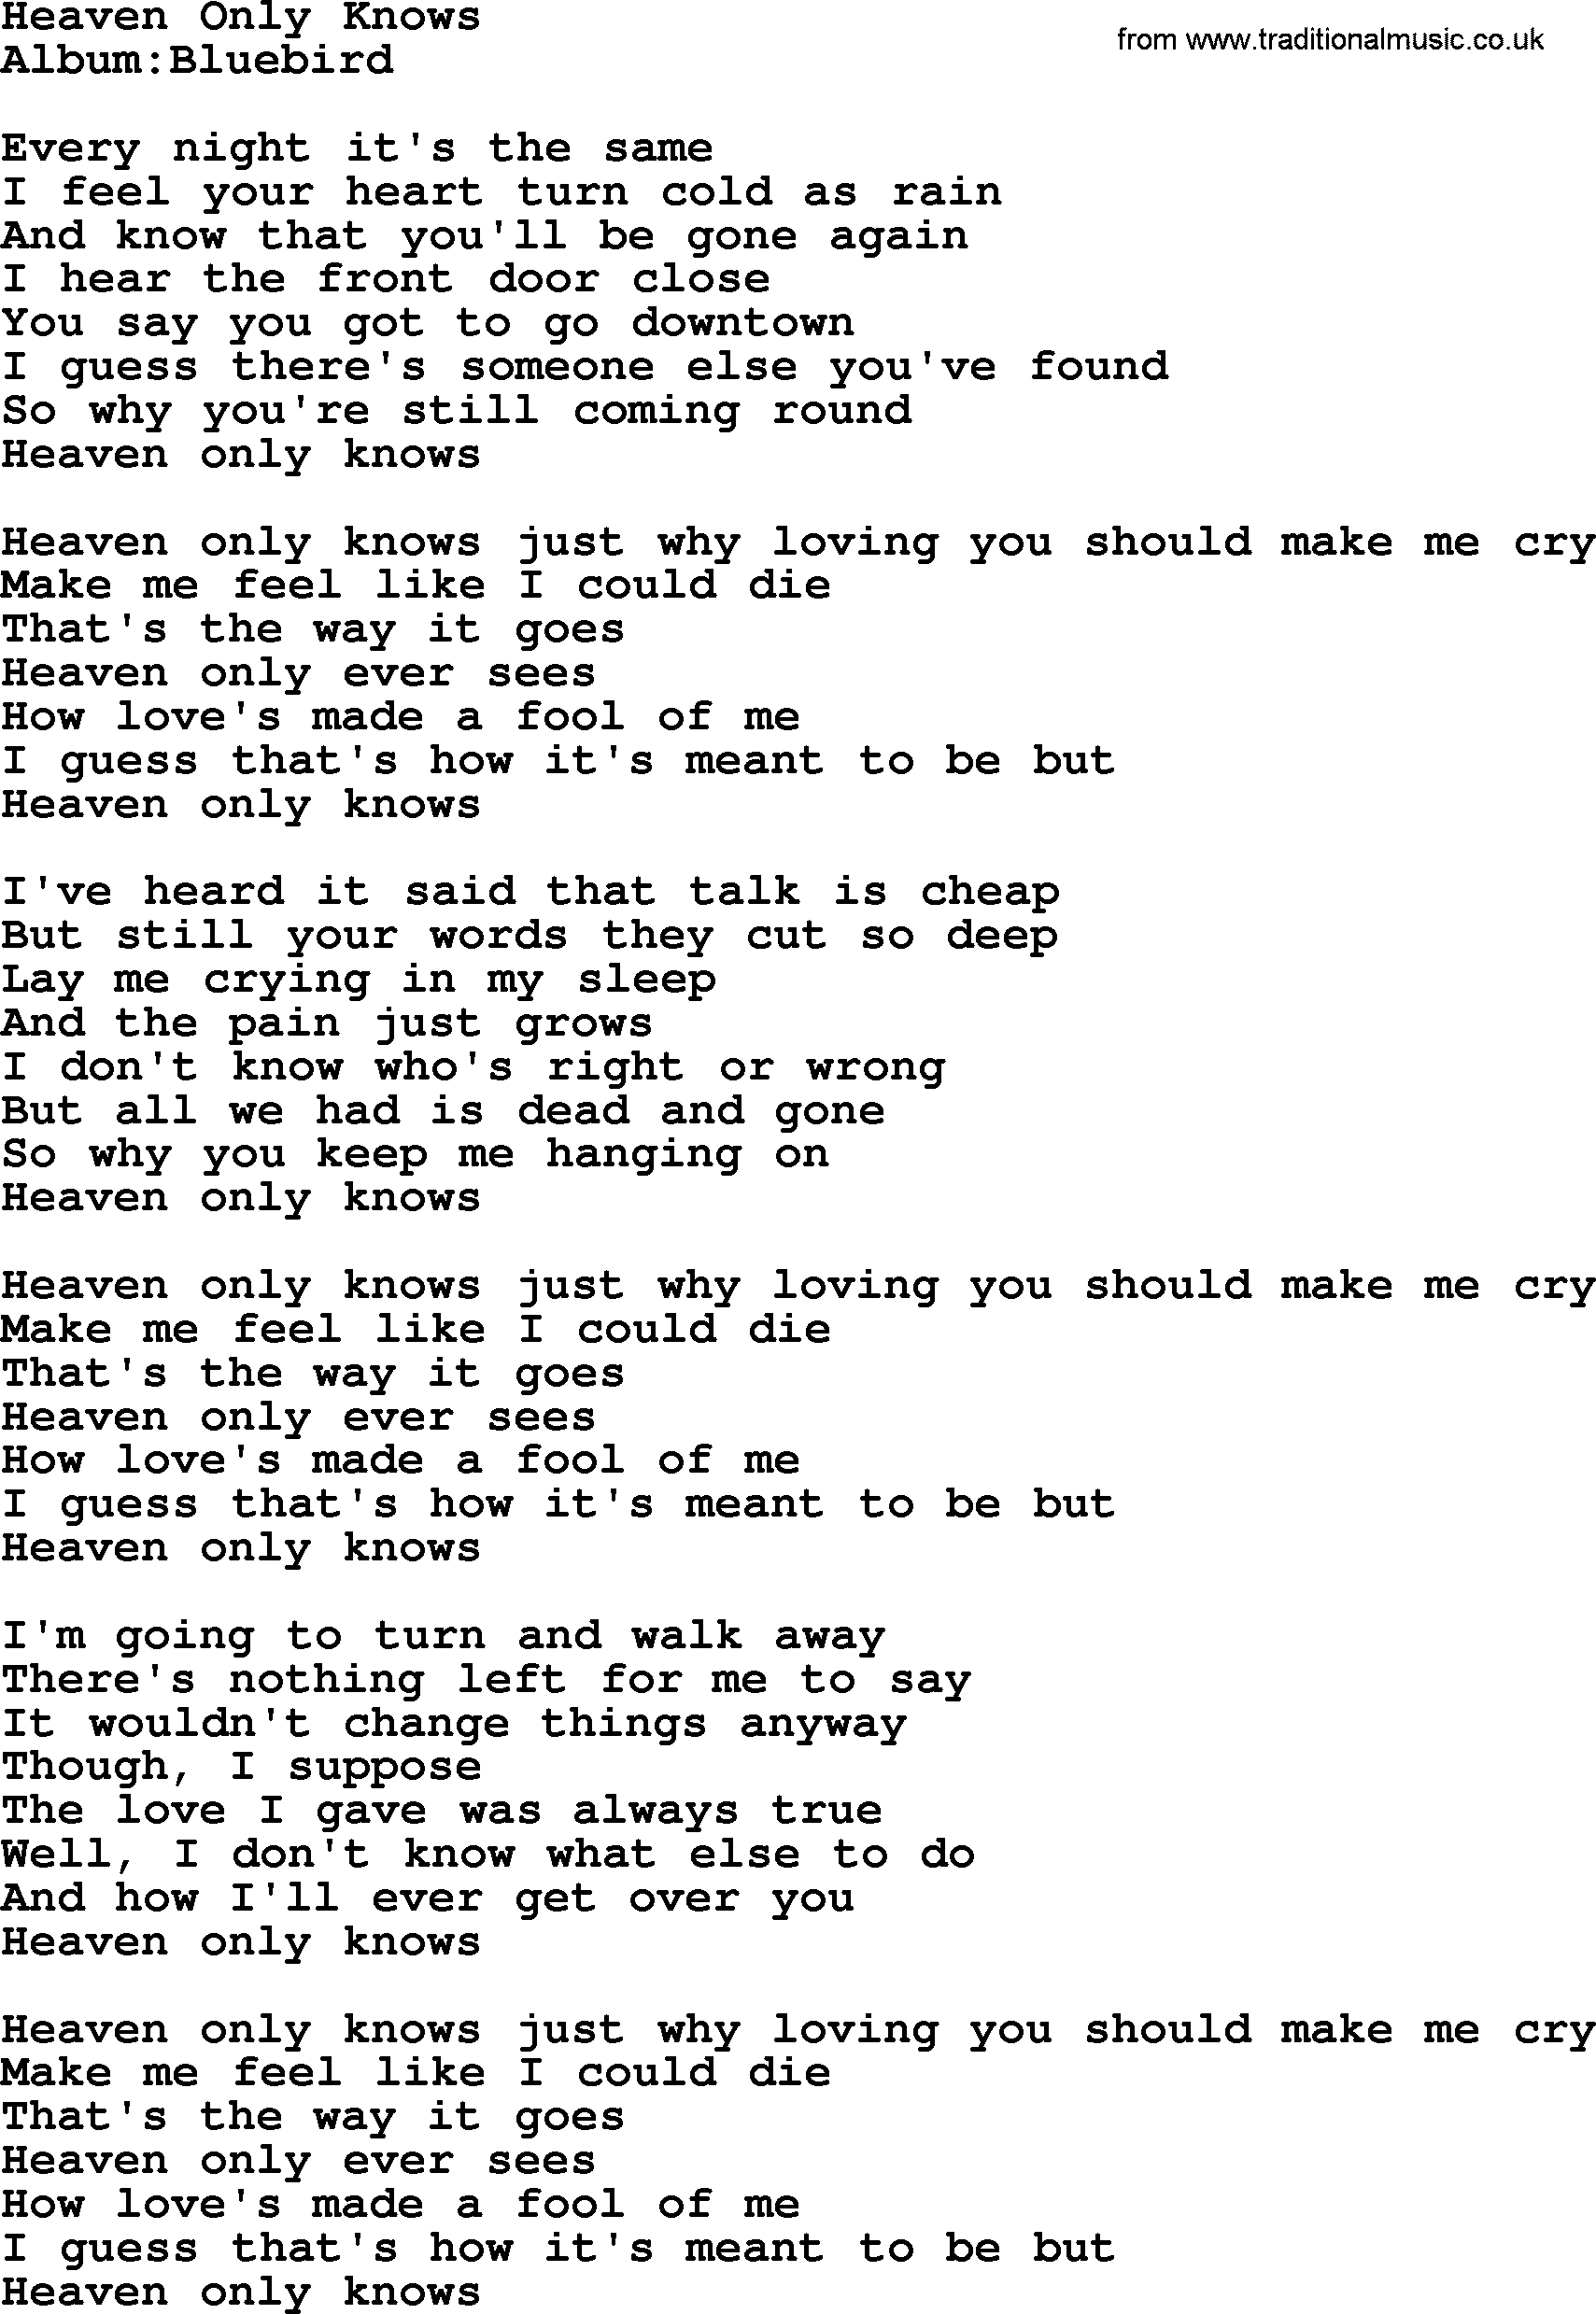 Emmylou Harris song: Heaven Only Knows lyrics